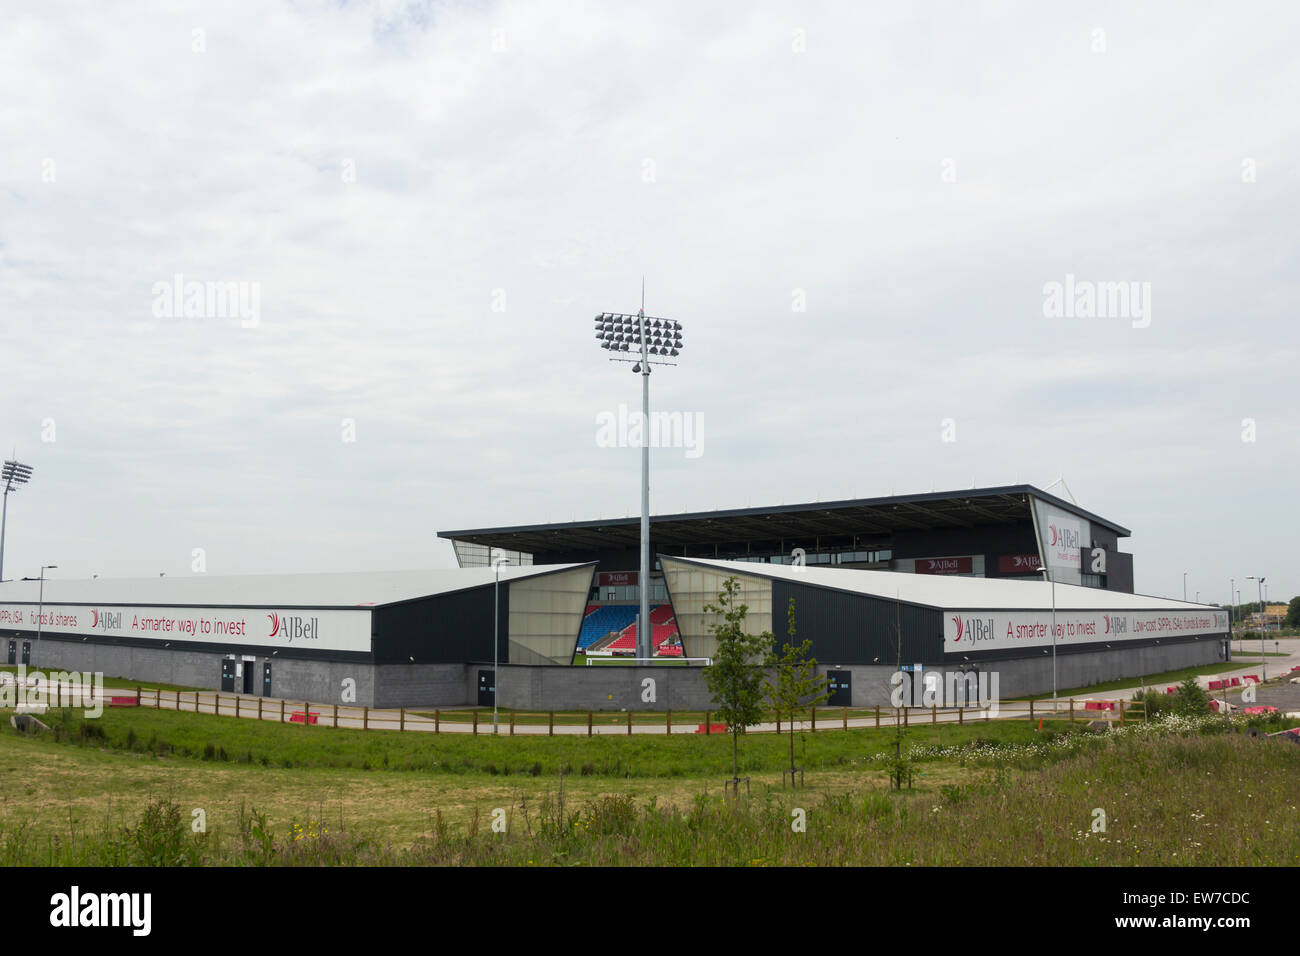 South-east aspect of the  AJ Bell stadium, Salford, formerly known as the Salford City Stadium. Stock Photo